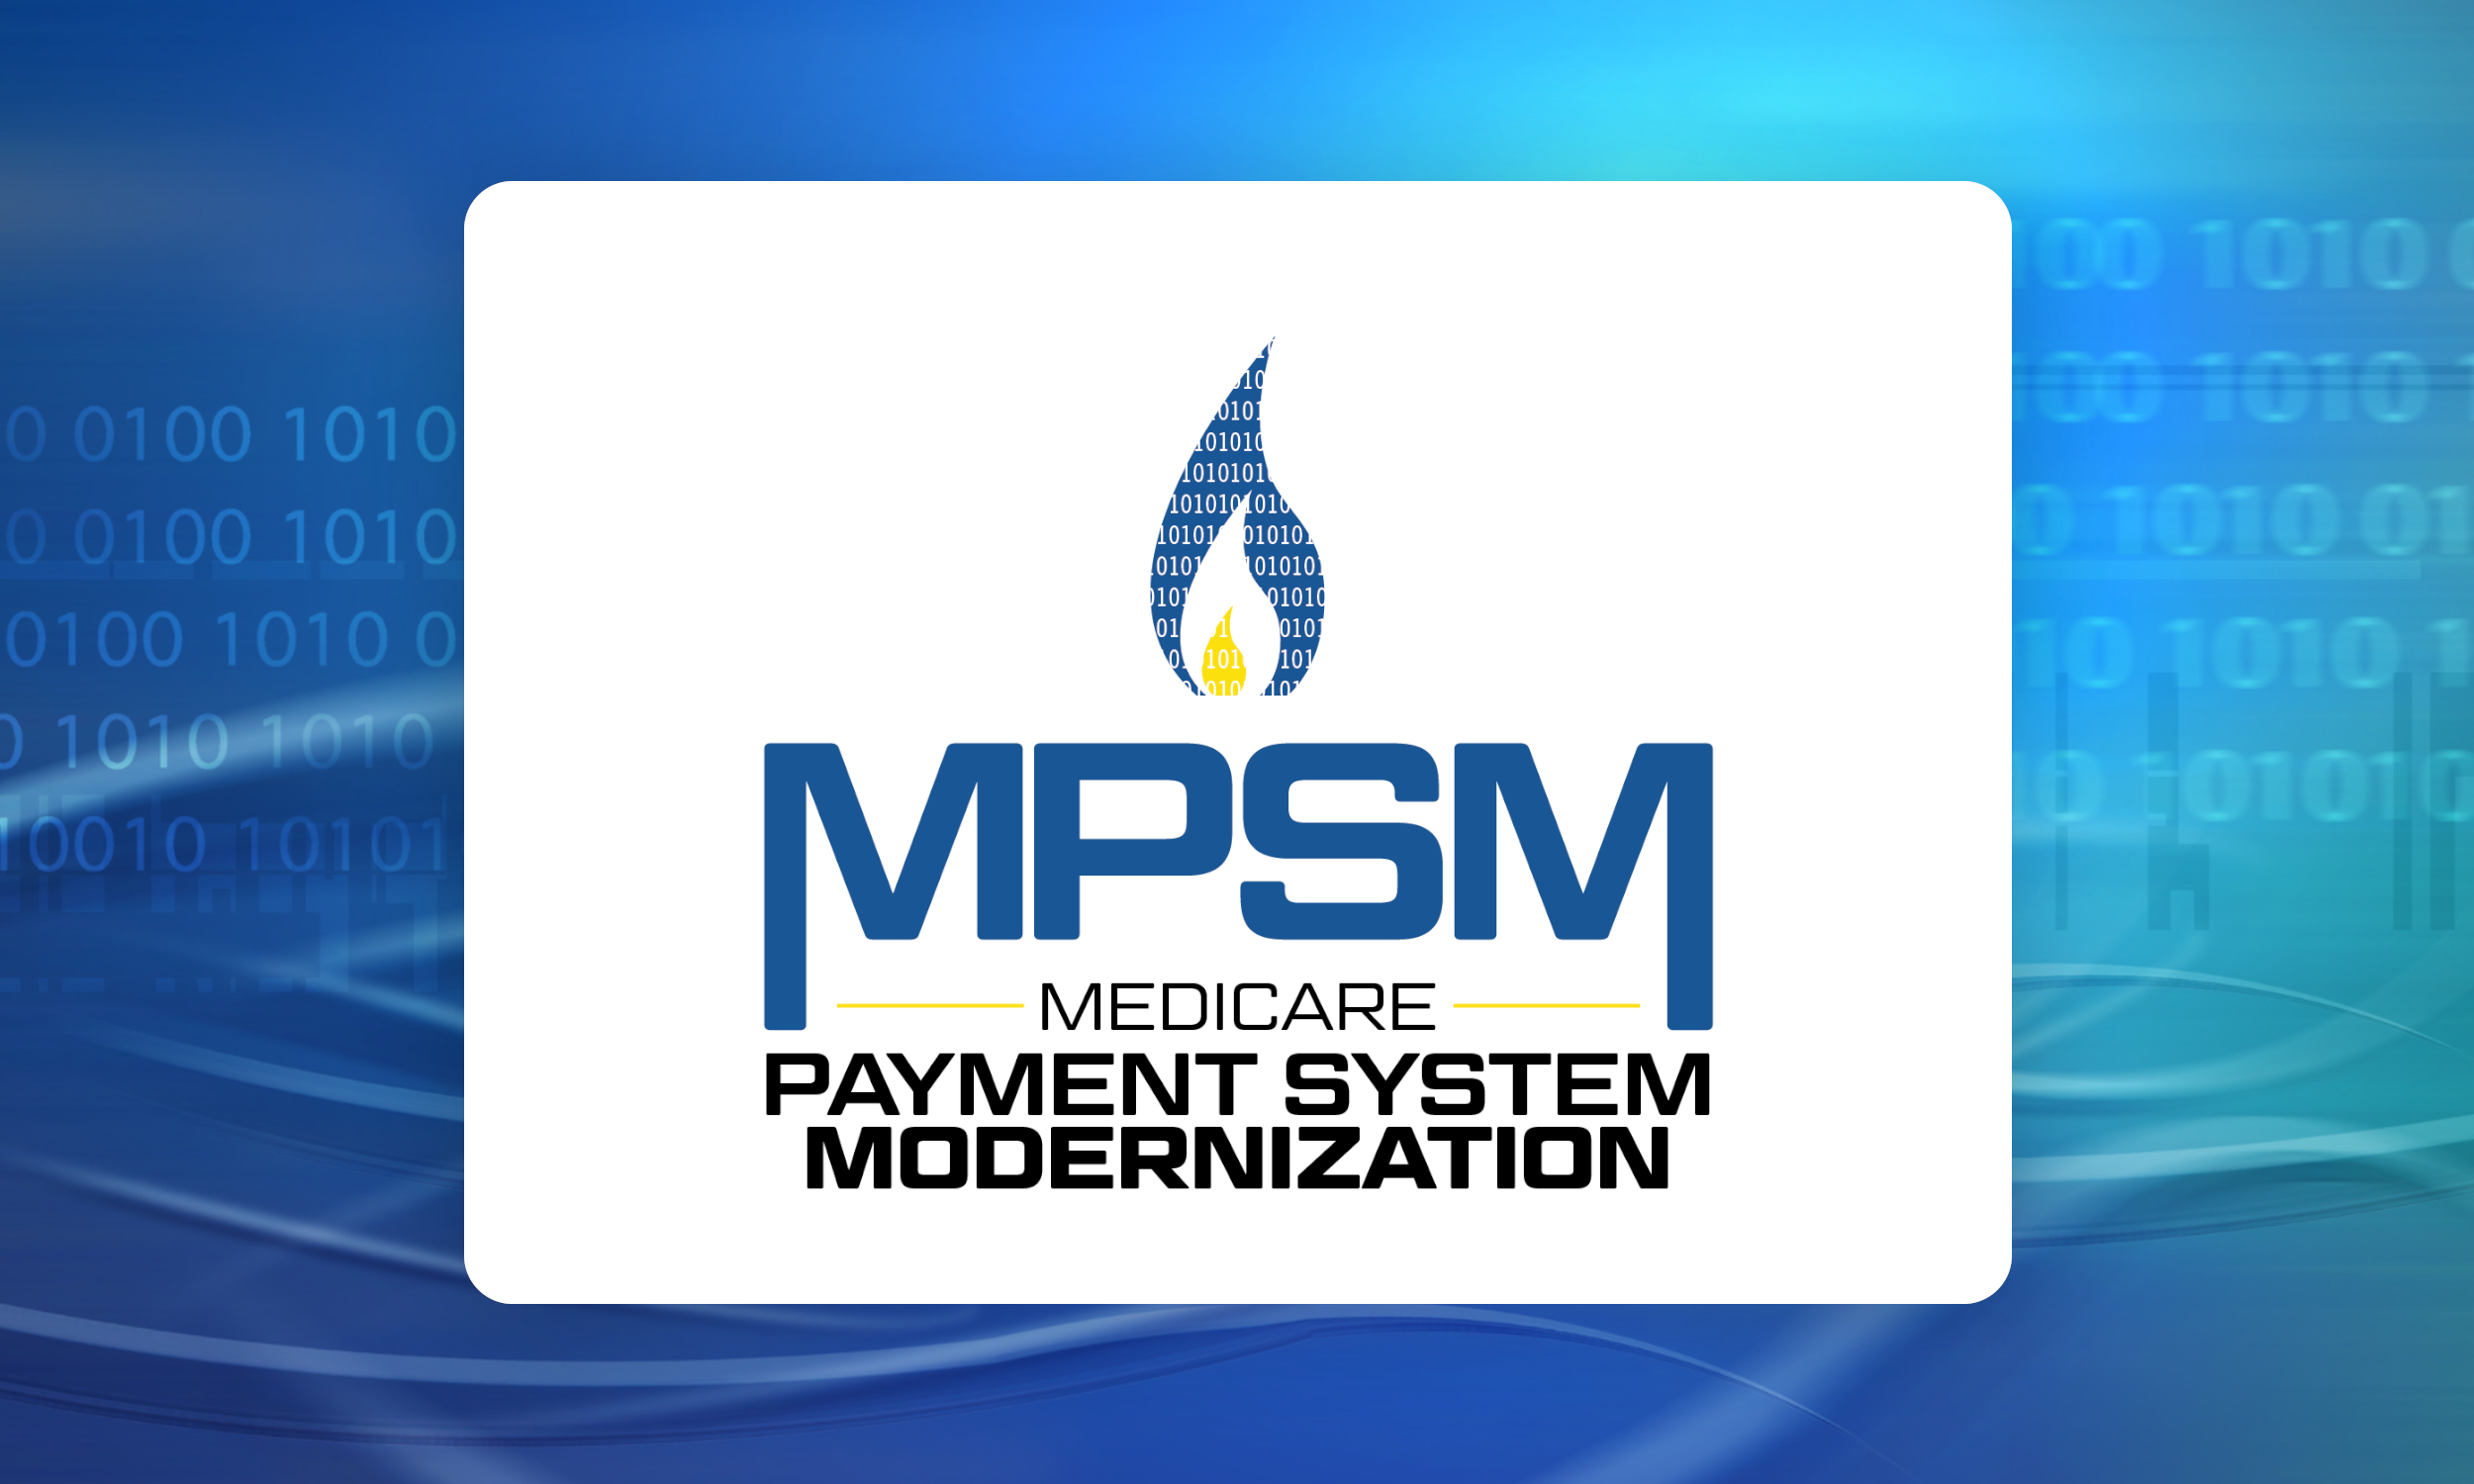 MPSM Medicare Payment System Modernization Logo in Text with Flame in Blue and Yellow on a Blue Technology Background